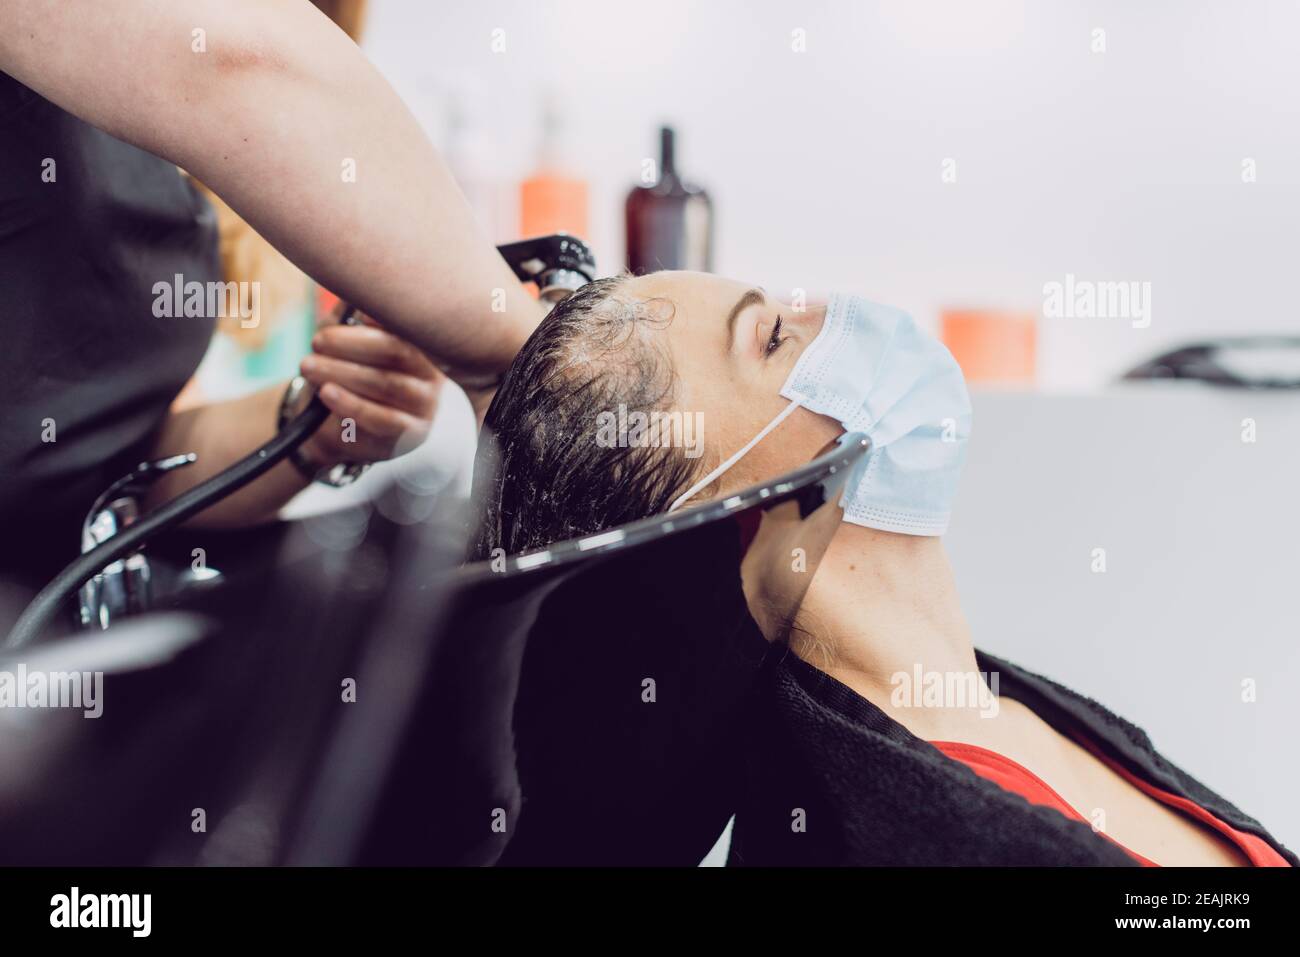 Woman with face mask in a hair salon during har wash Stock Photo - Alamy